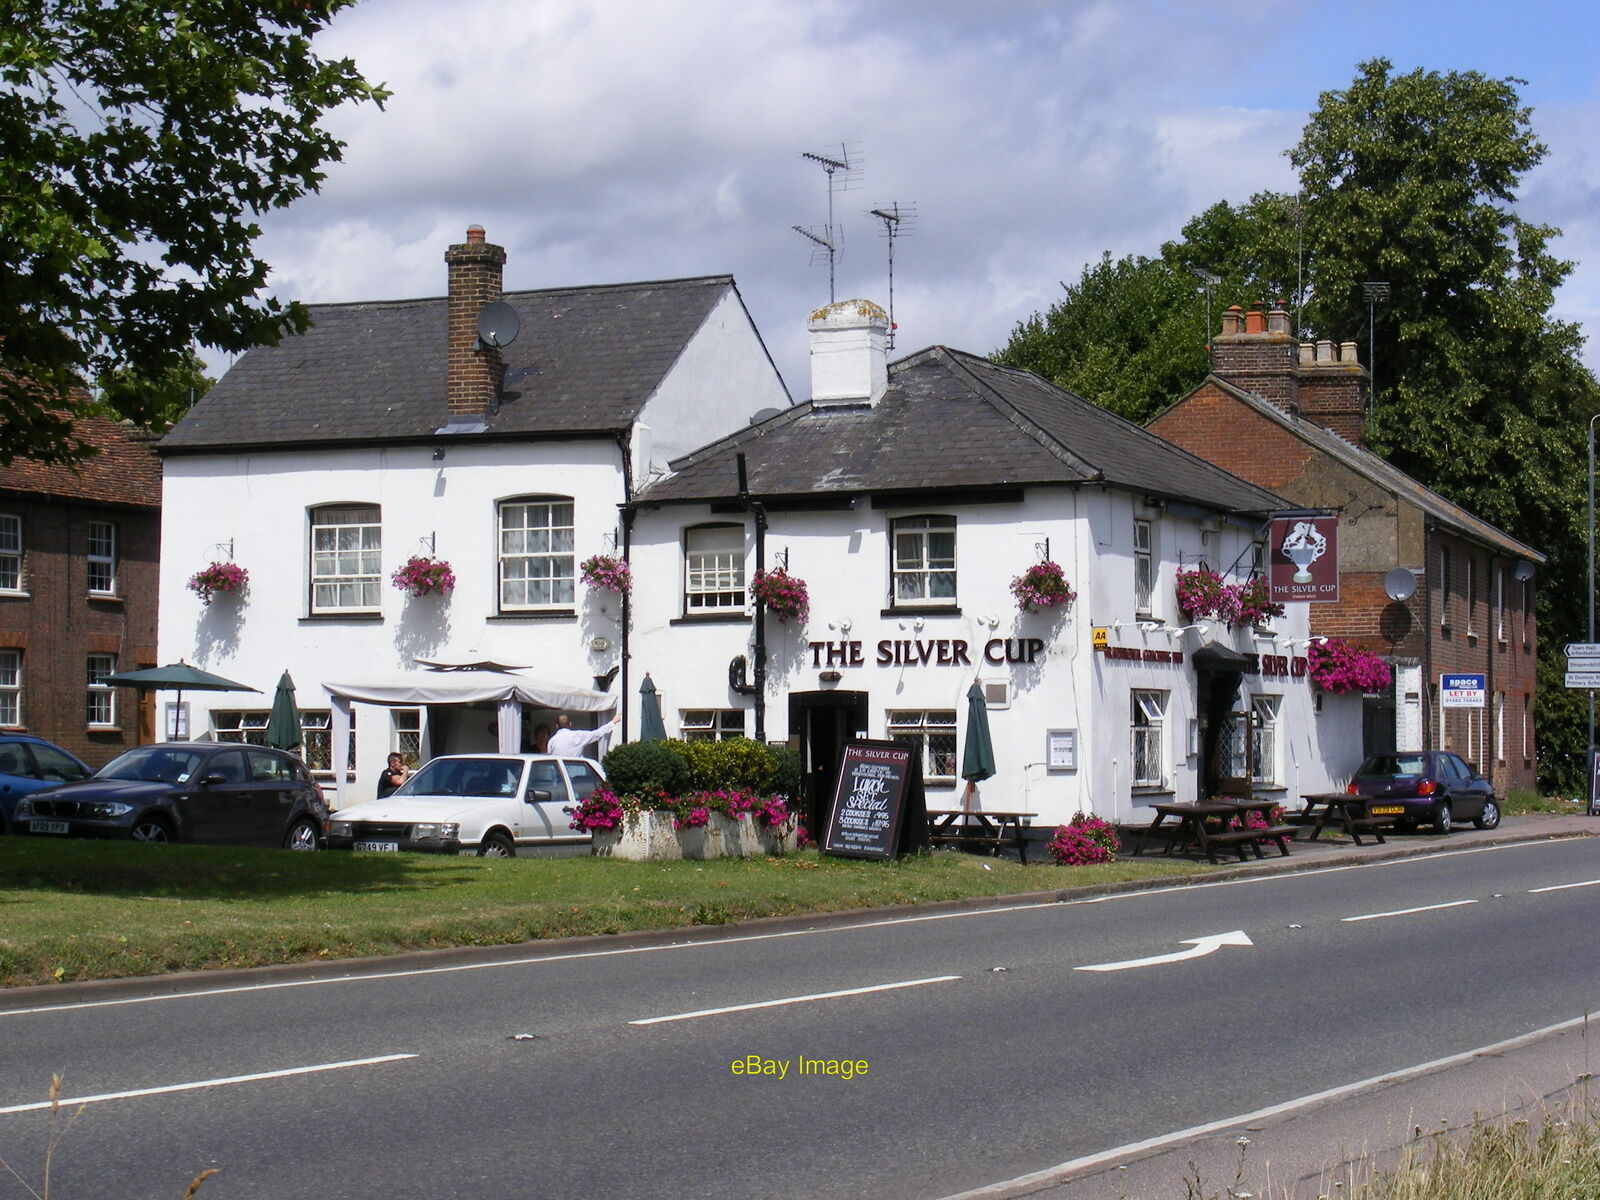 Photo 6x4 The Silver Cup Public House On the A1081 St.Albans Road c2009